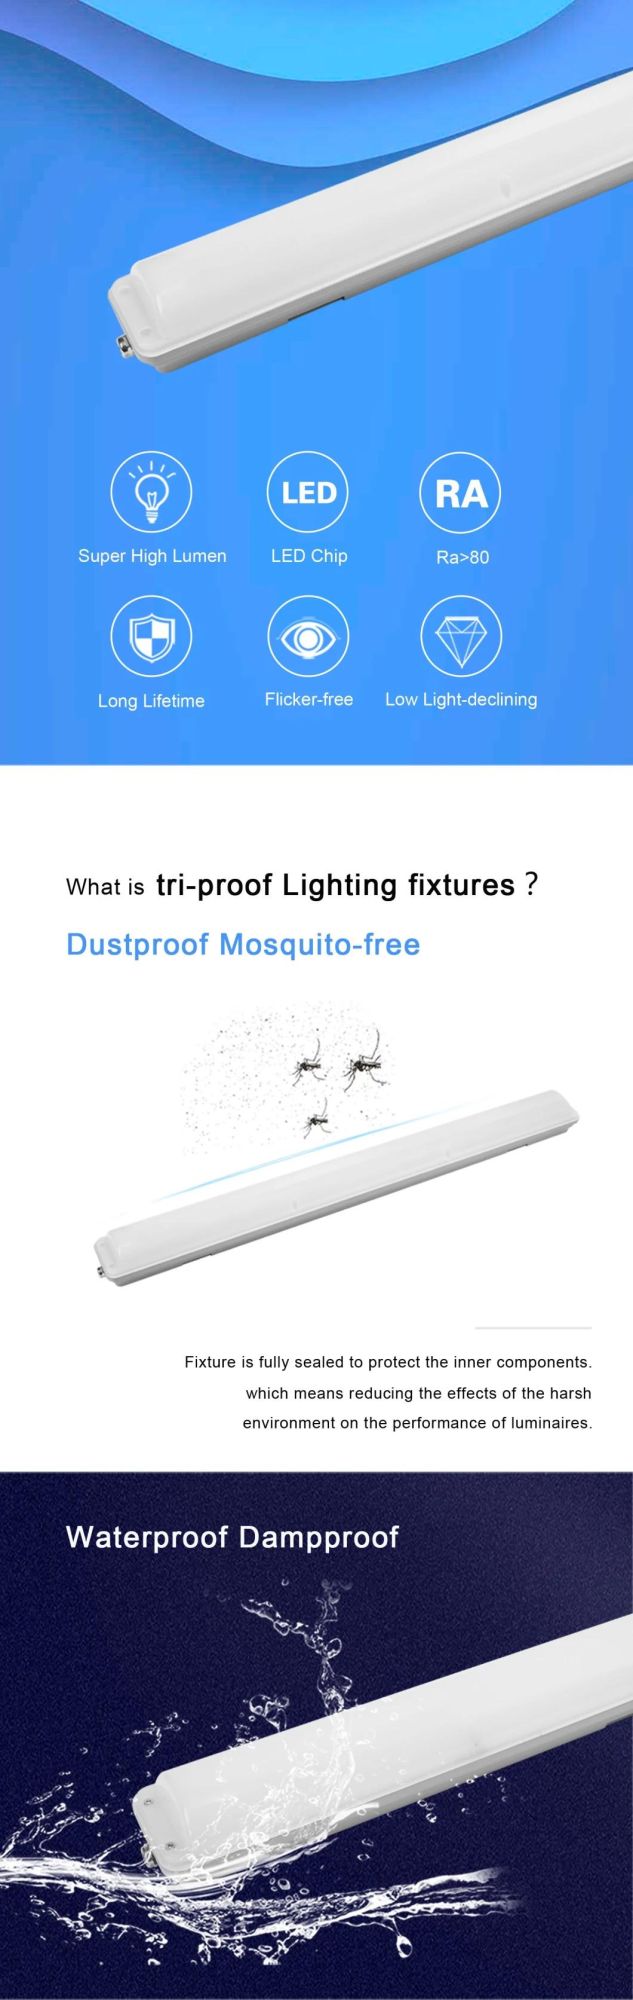 Hot Selling LED Vapor-Tight Lamp with Carton Box Packed